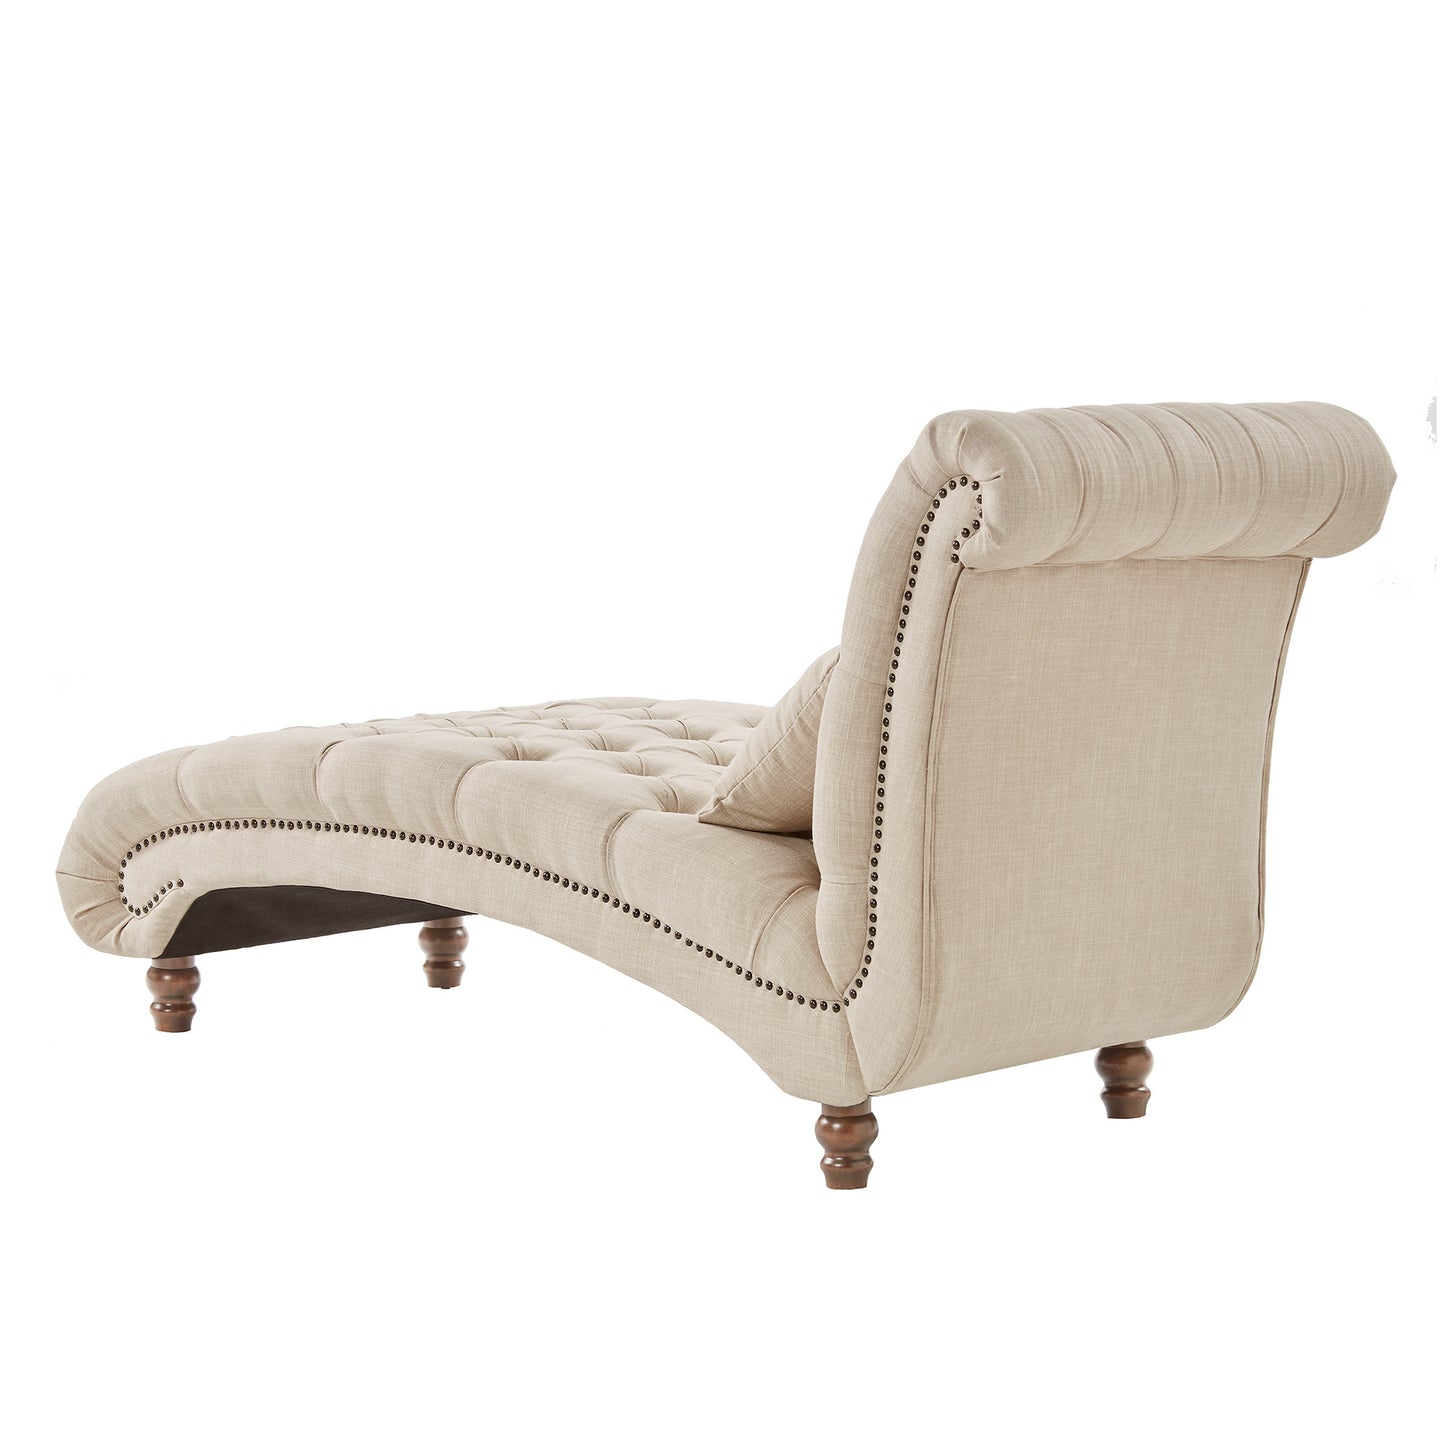 Tufted Oversized Chaise Lounge - Beige Linen